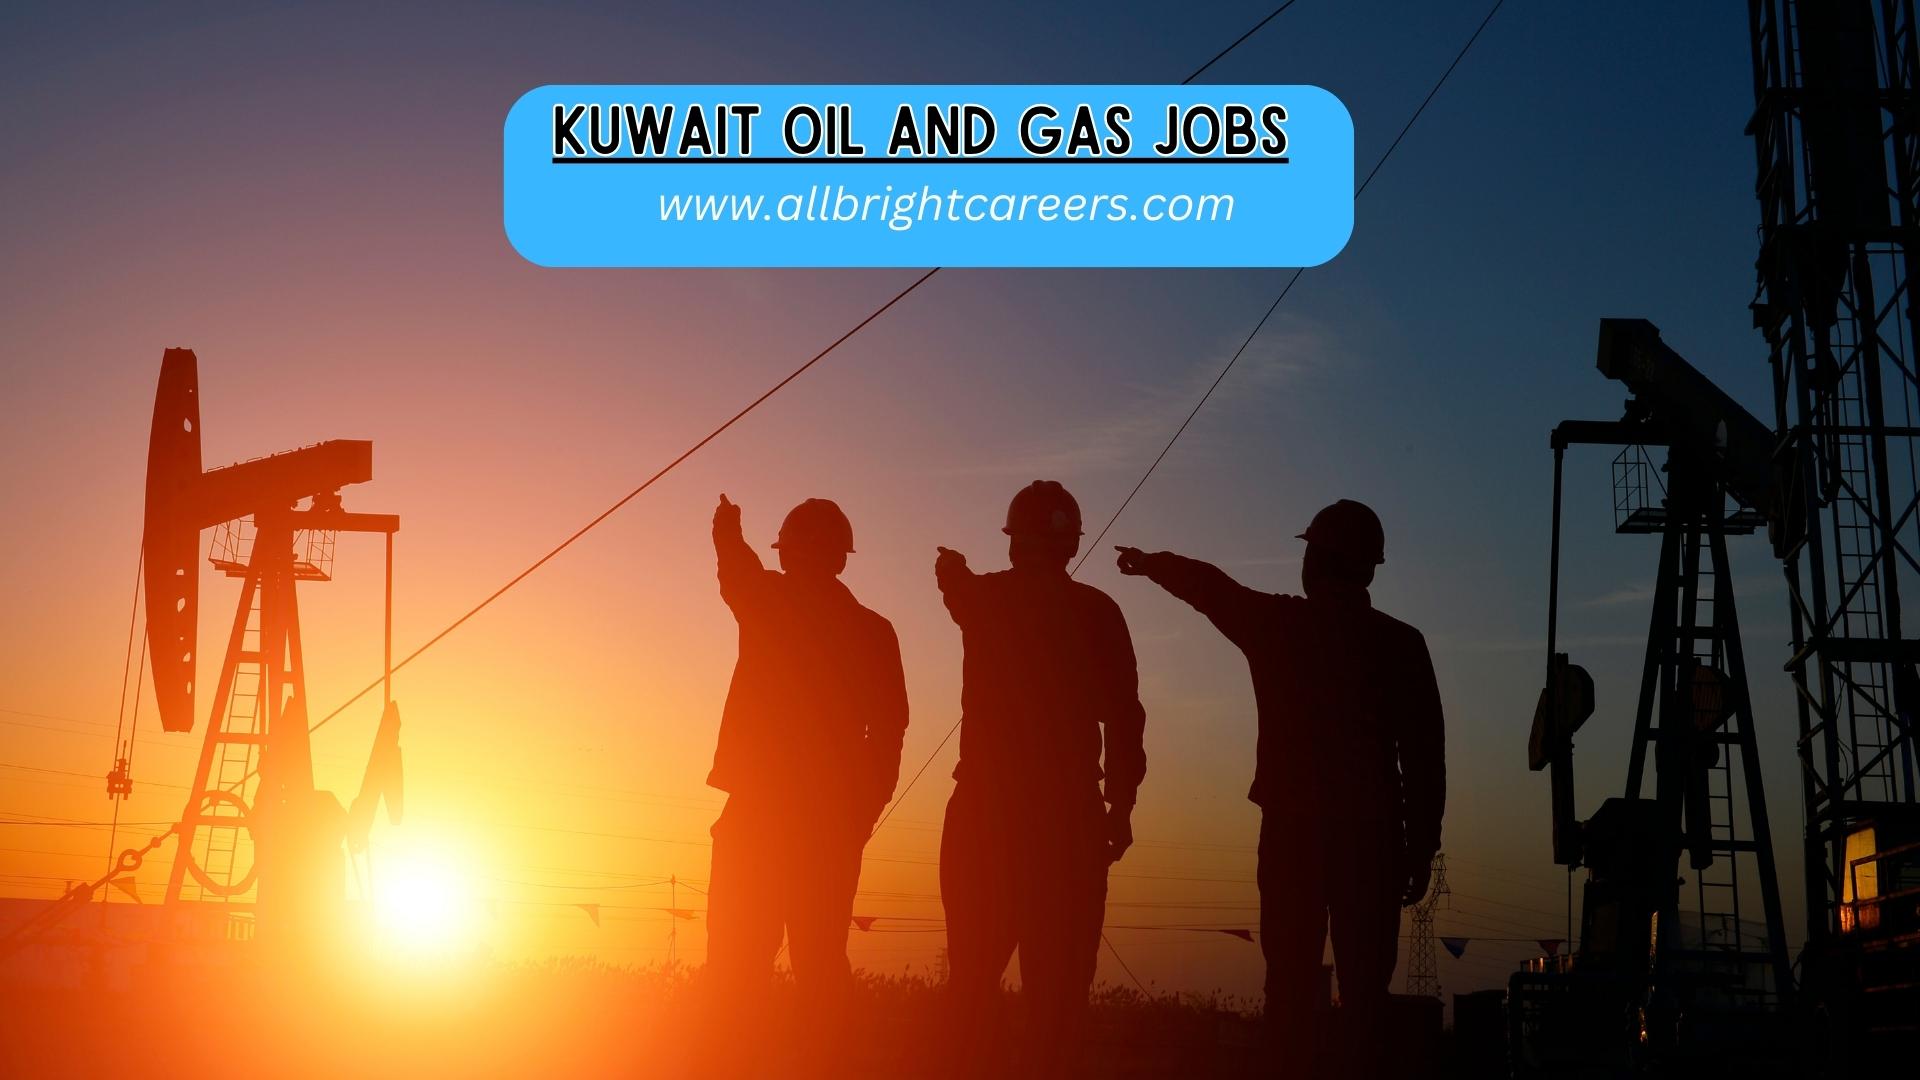 Kuwait Oil and Gas jobs